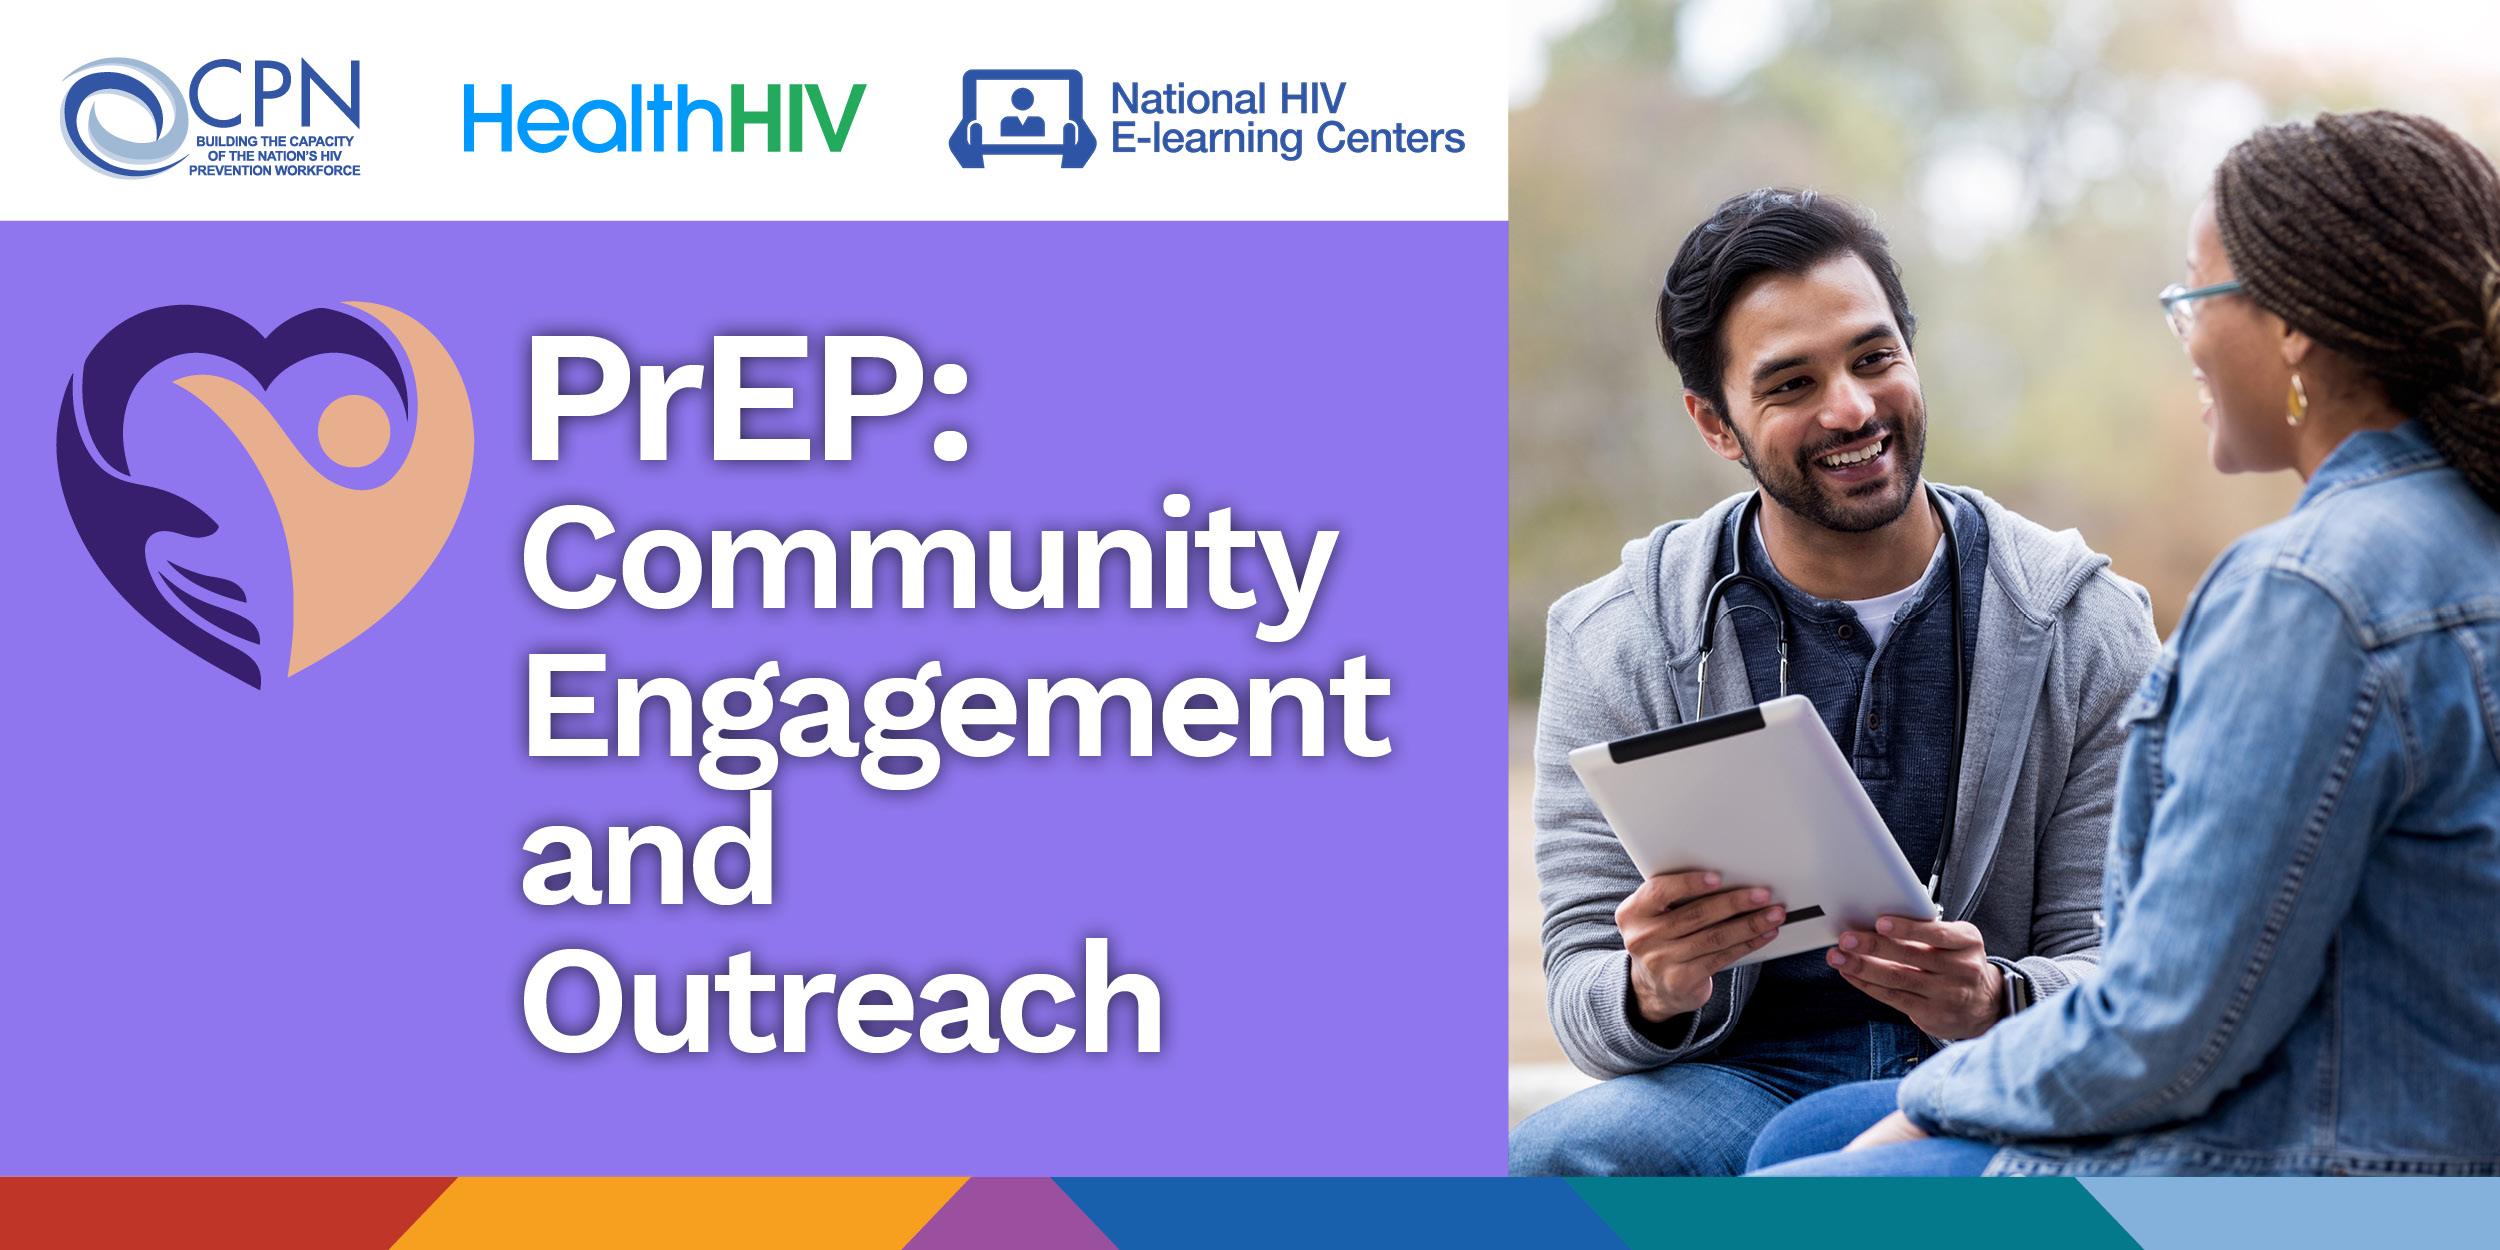 PrEP: Community Engagement and Outreach